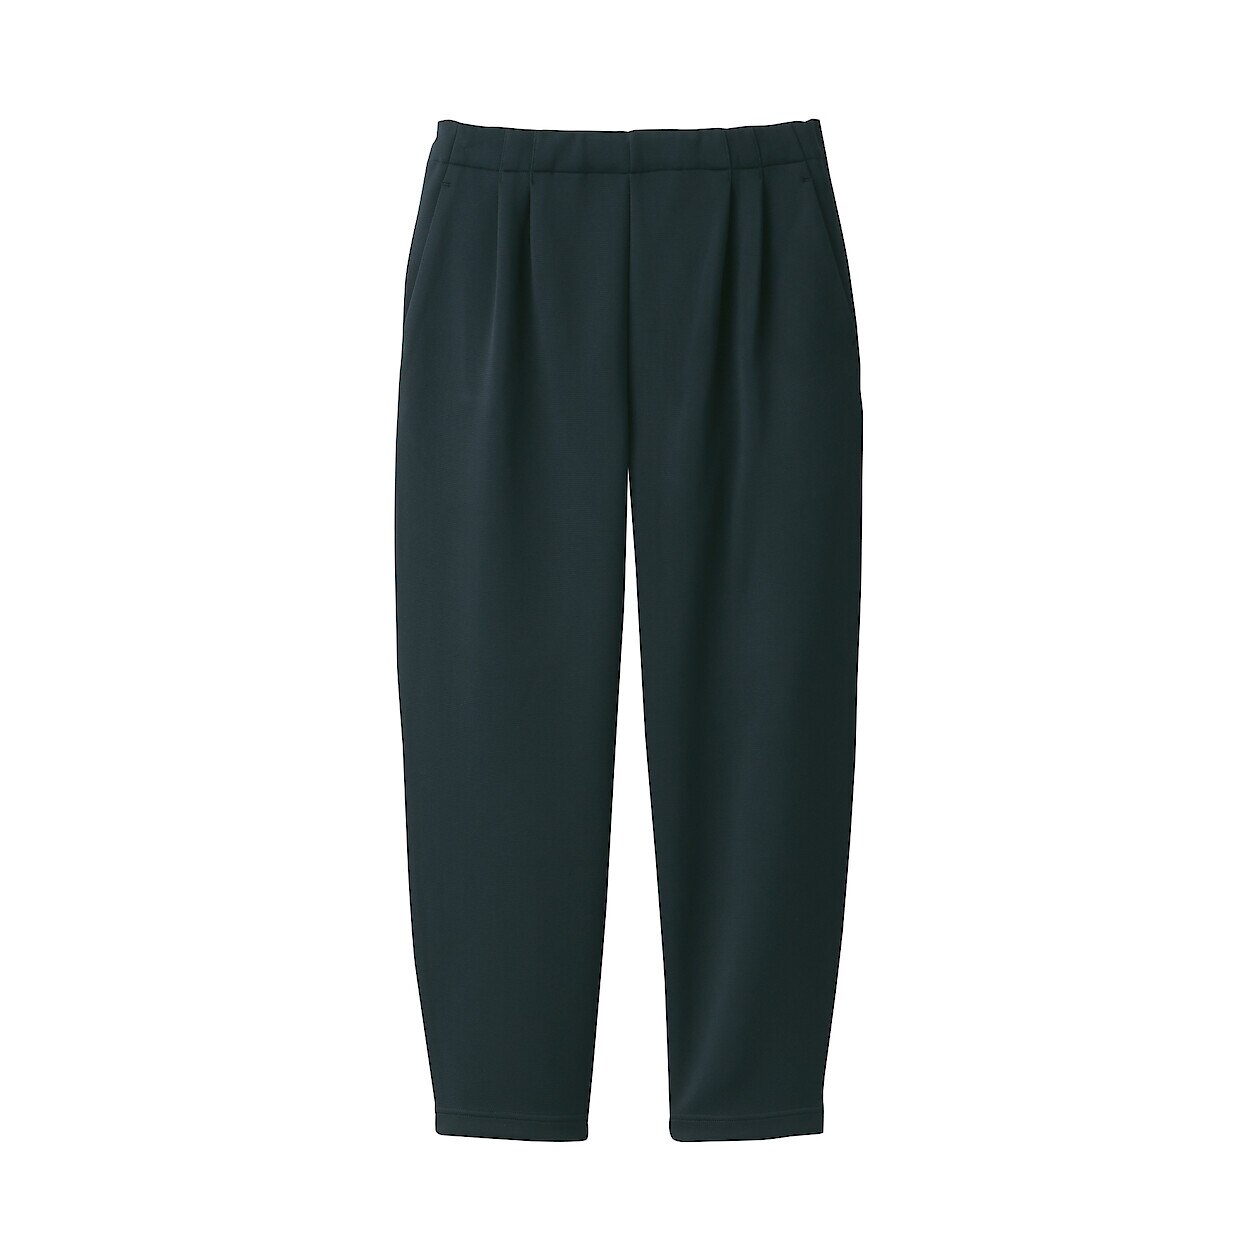 Unisex Polyester Jogging Trousers